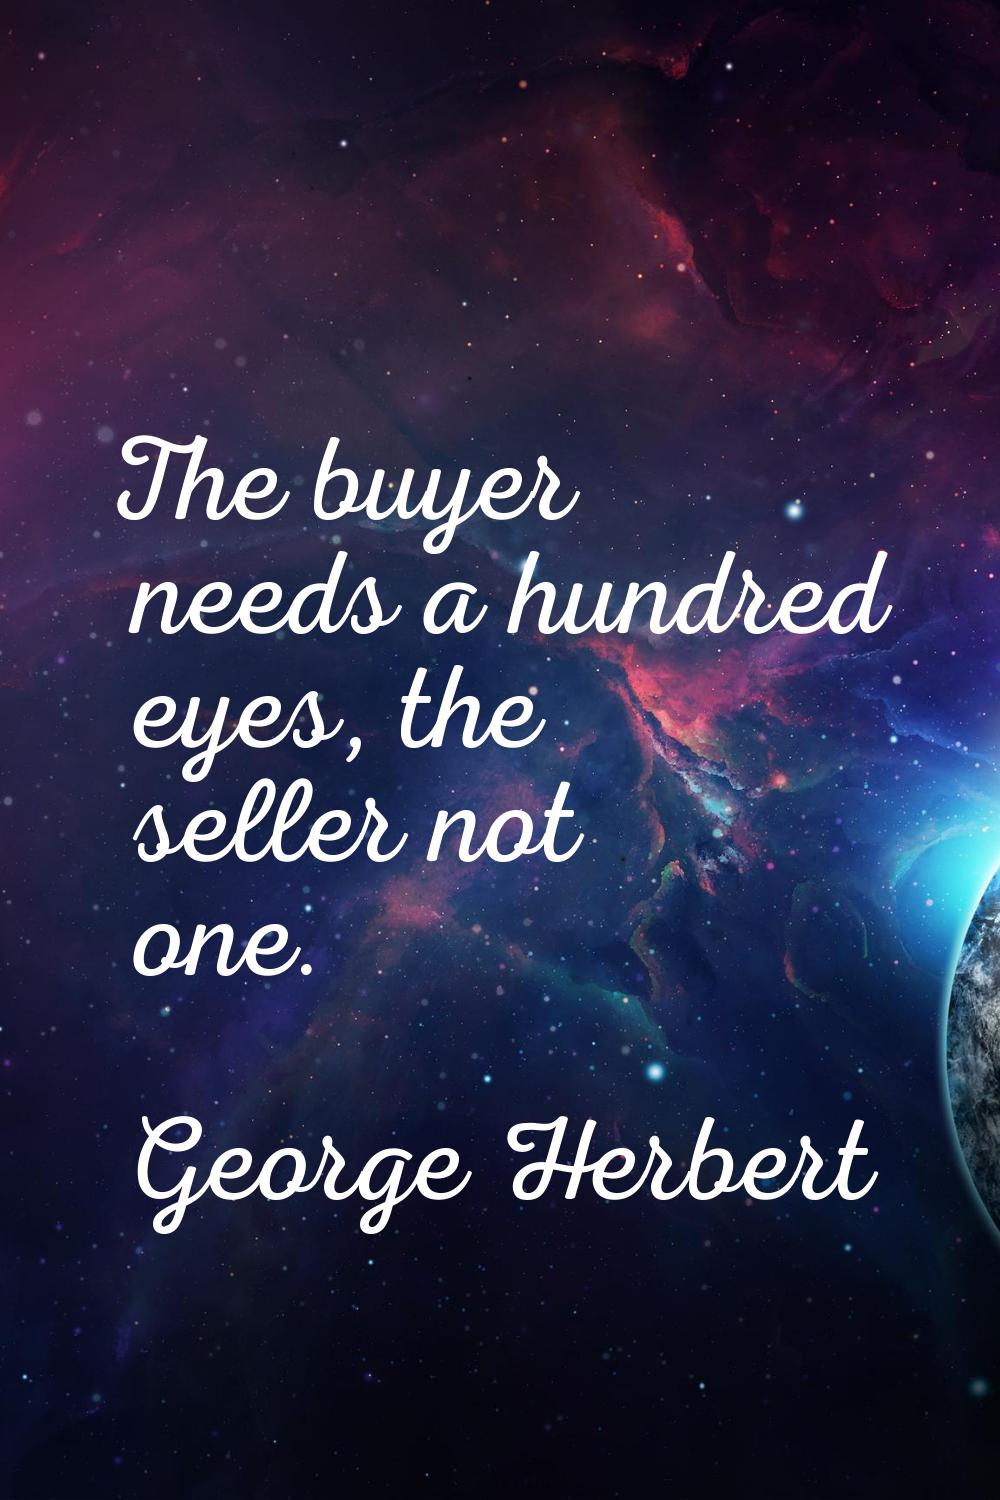 The buyer needs a hundred eyes, the seller not one.